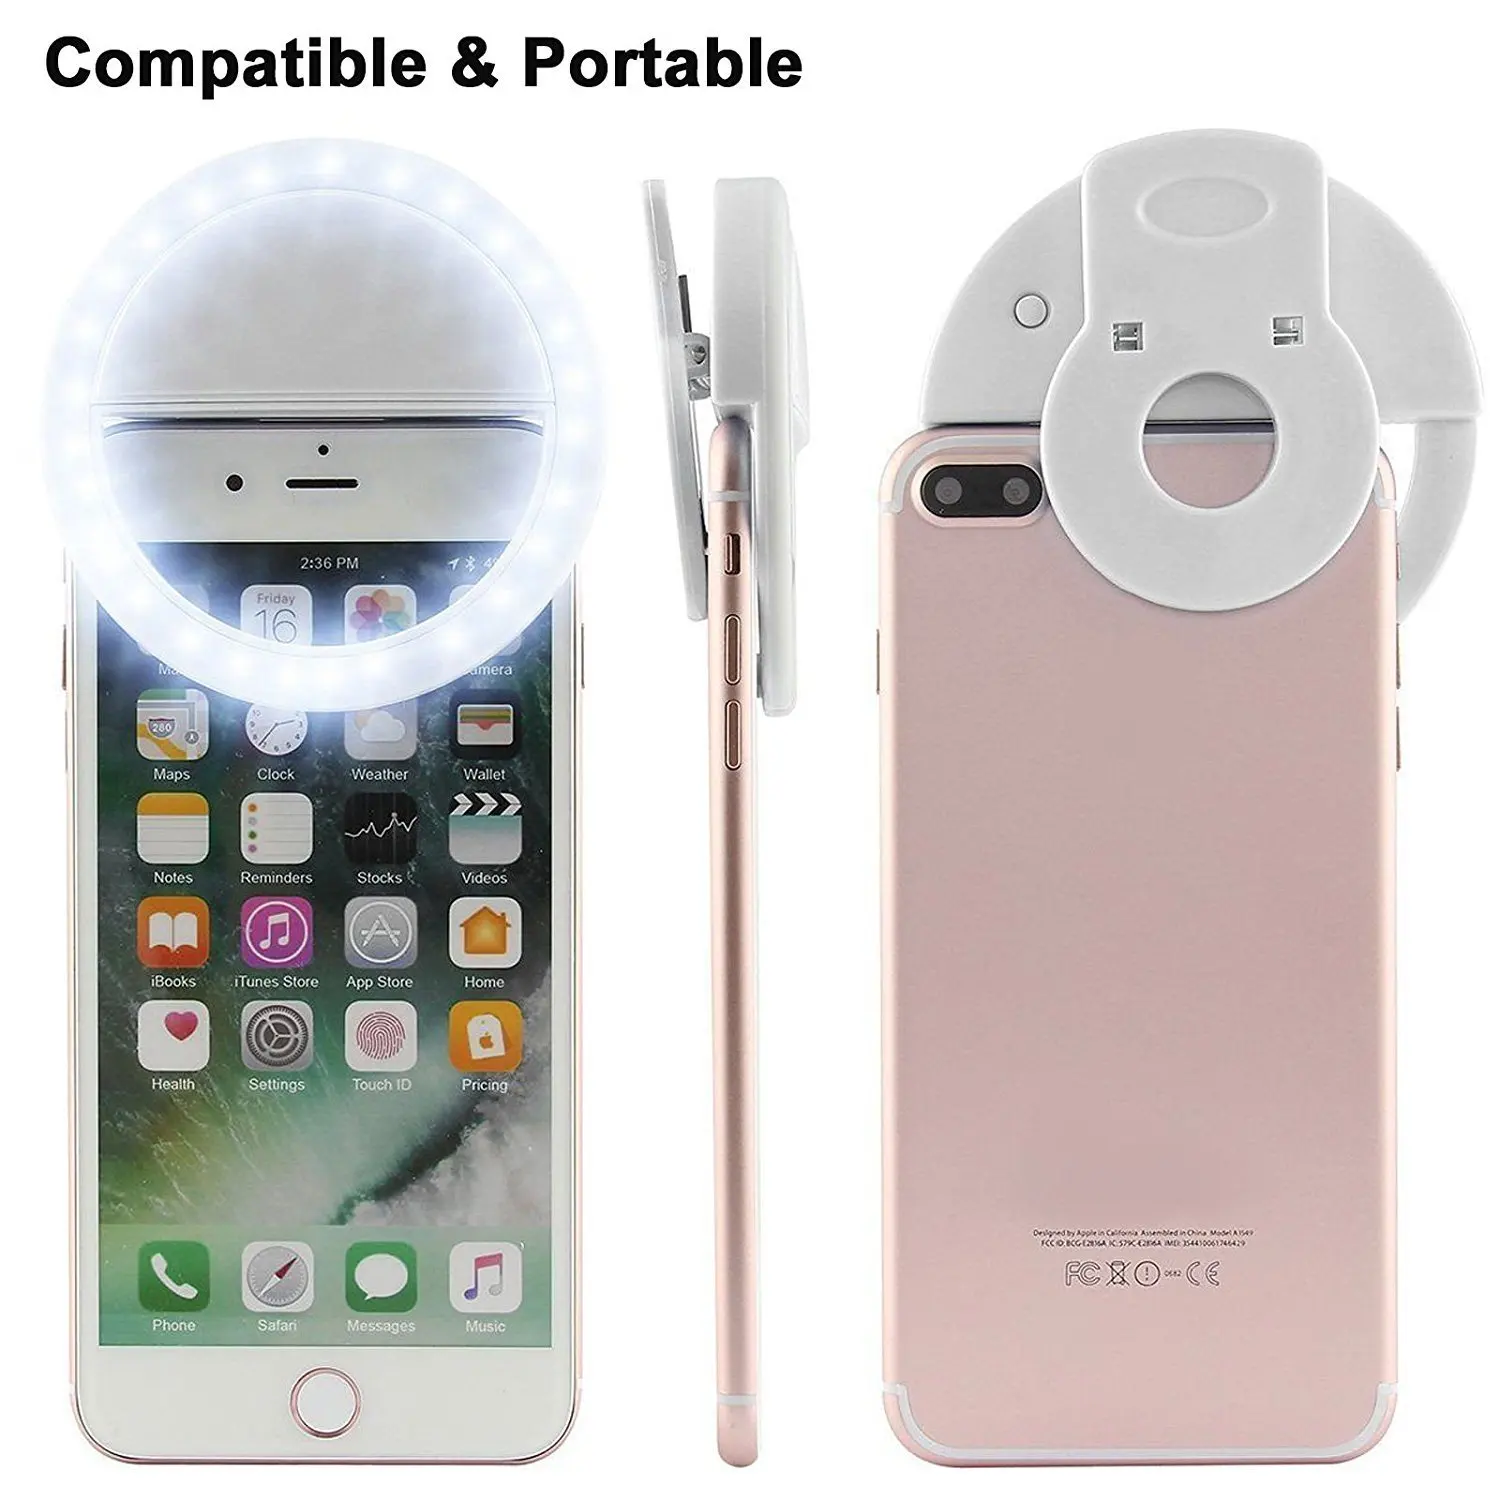 Battery Selfie Light Ring Light LED Photographic Lighting Photo Lamps Video Light Photography Ringlight Photo for Phone Iphone